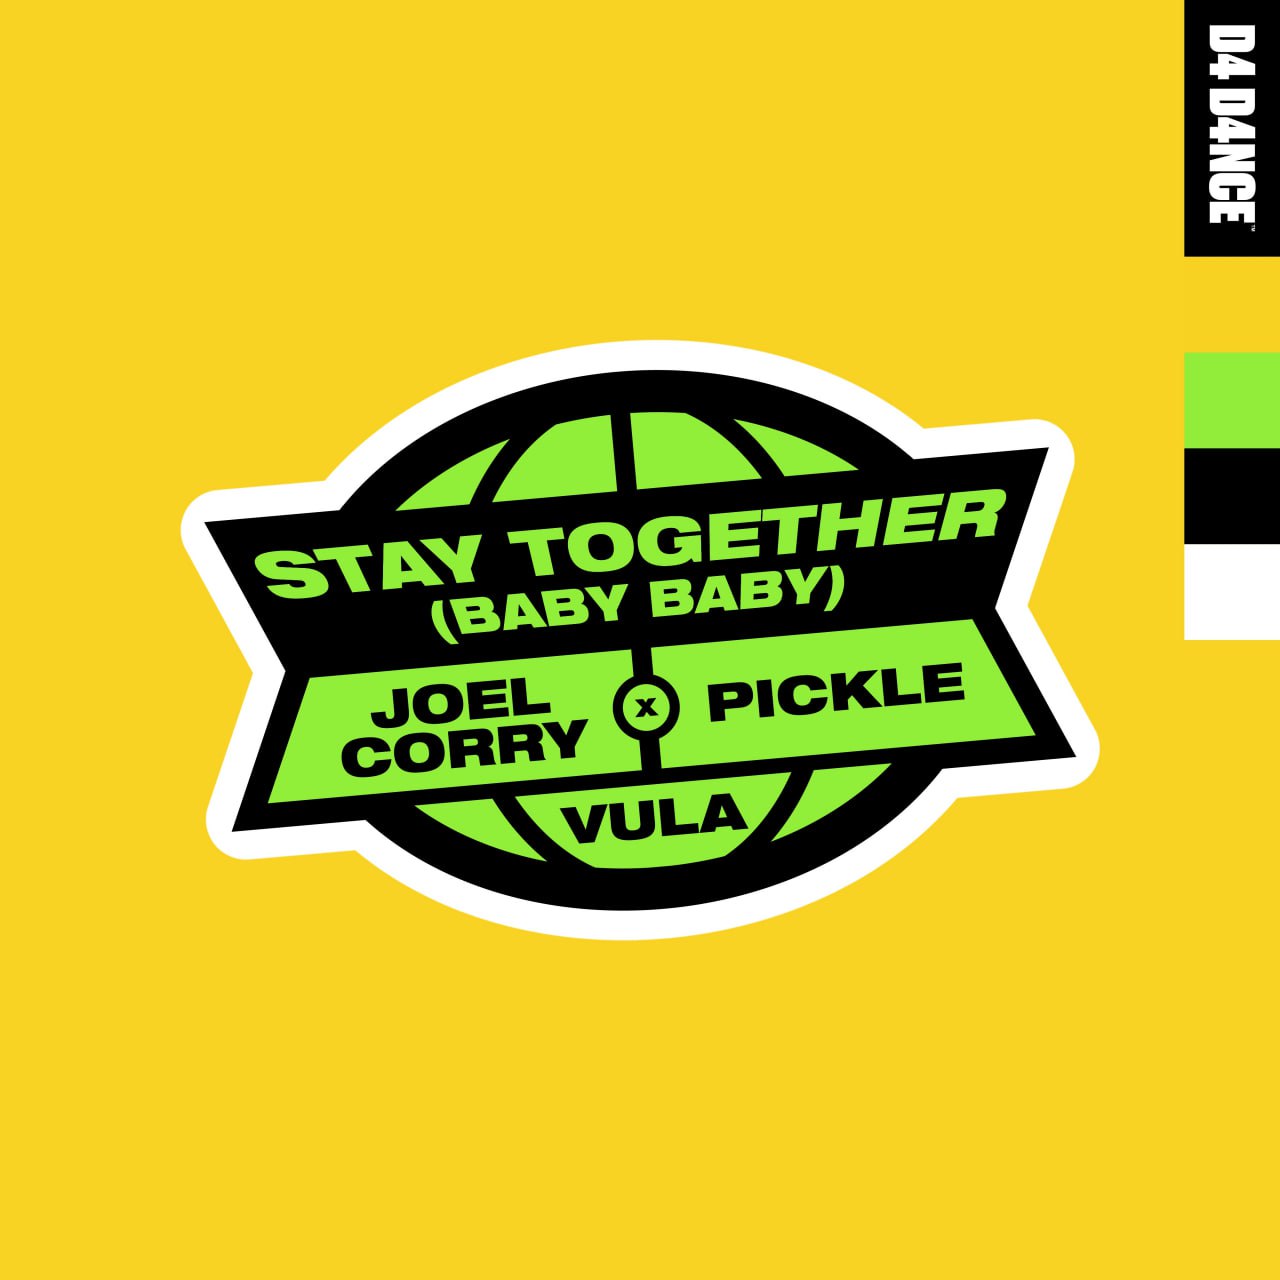 Joel Corry & Pickle, Vula - Stay Together (Baby Baby) [Extended Mix]